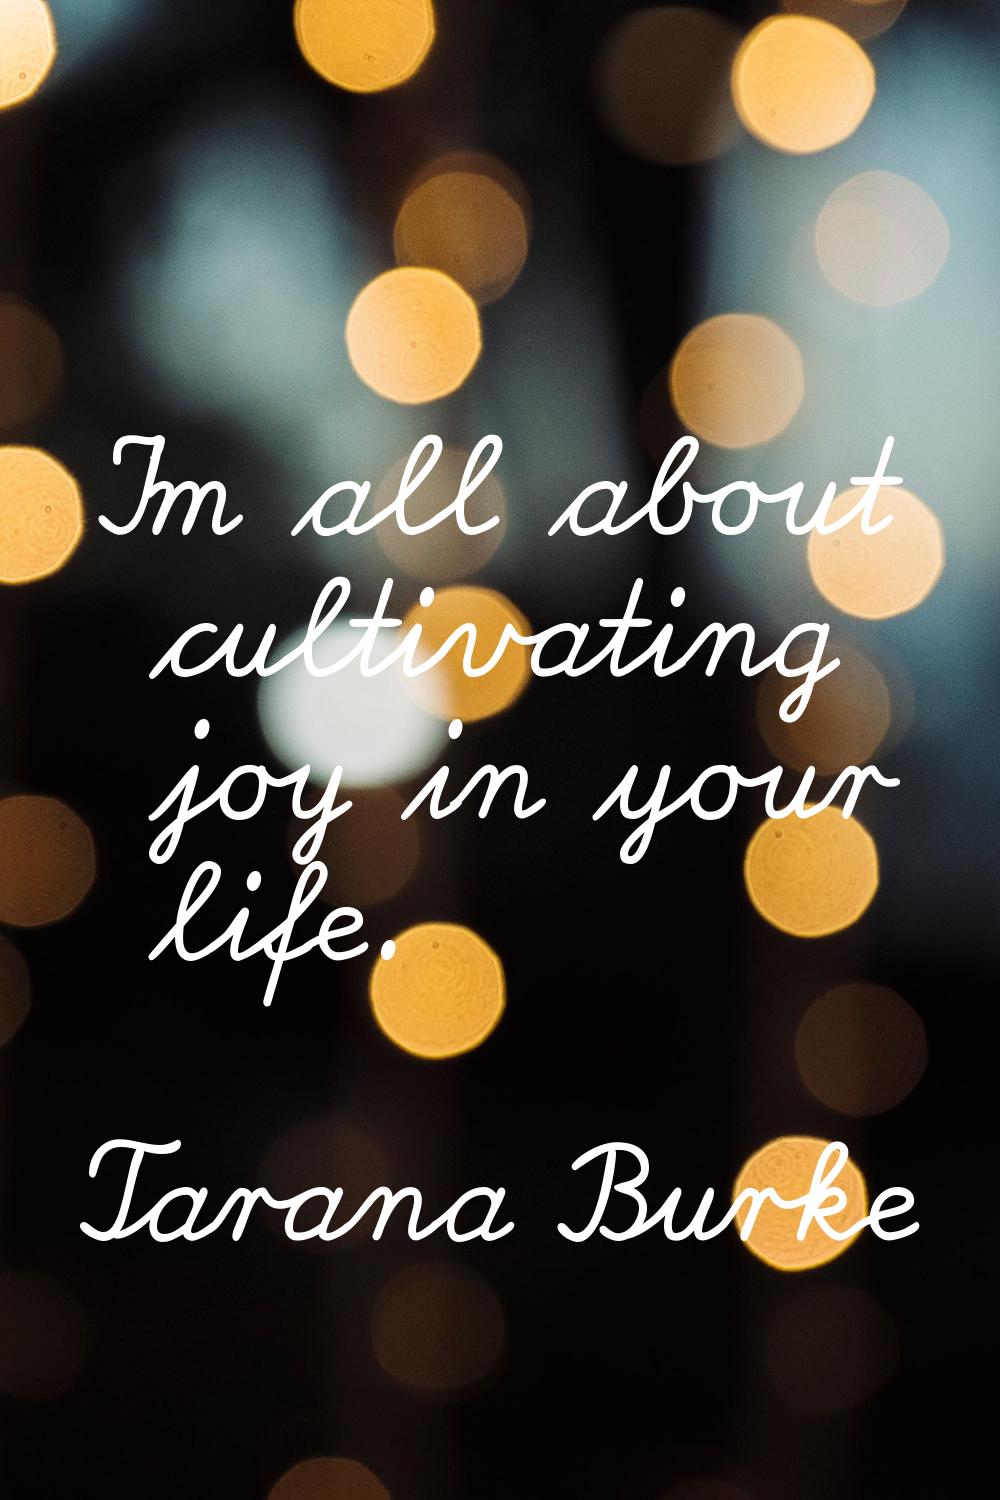 I'm all about cultivating joy in your life.